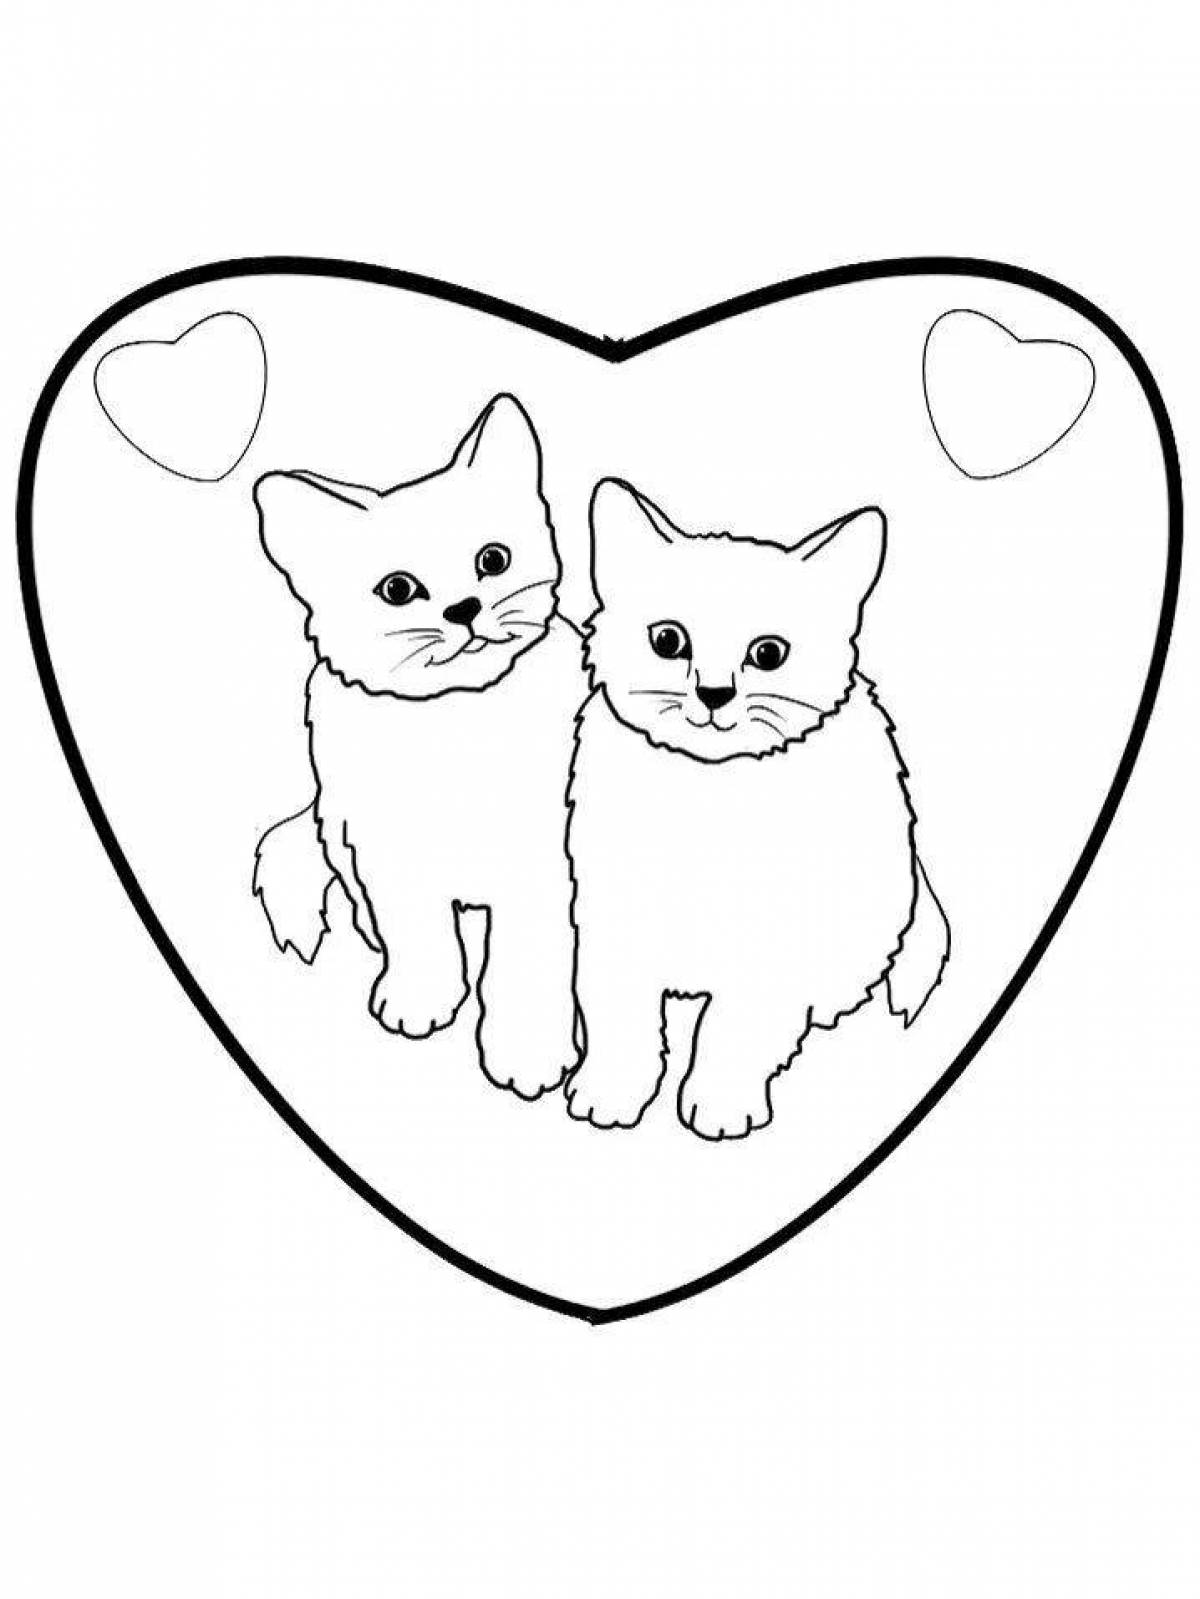 Cat with heart #3